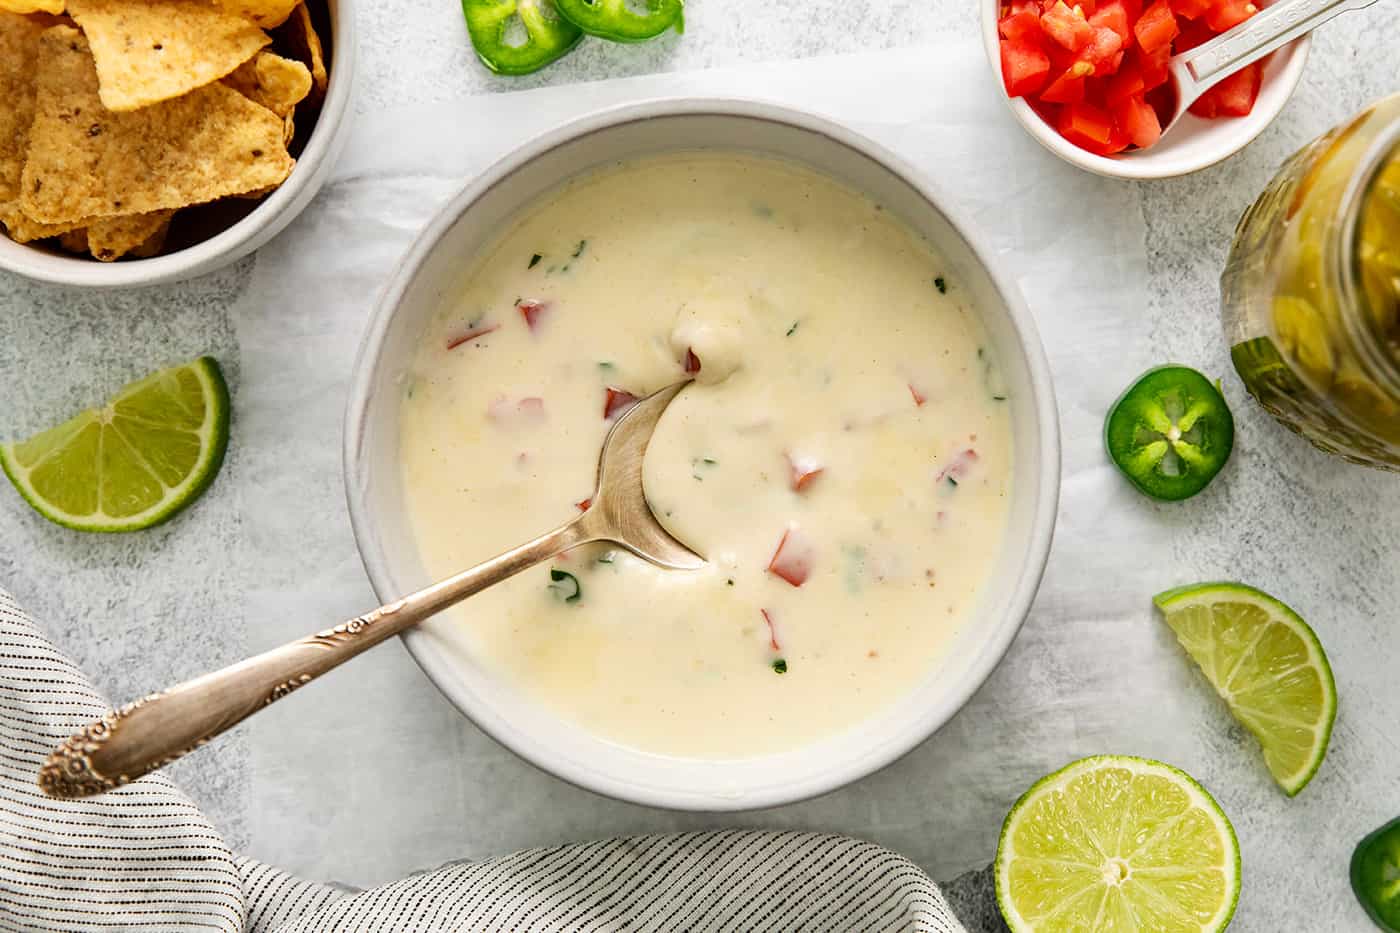 Overhead view of a bowl of white cheese dip